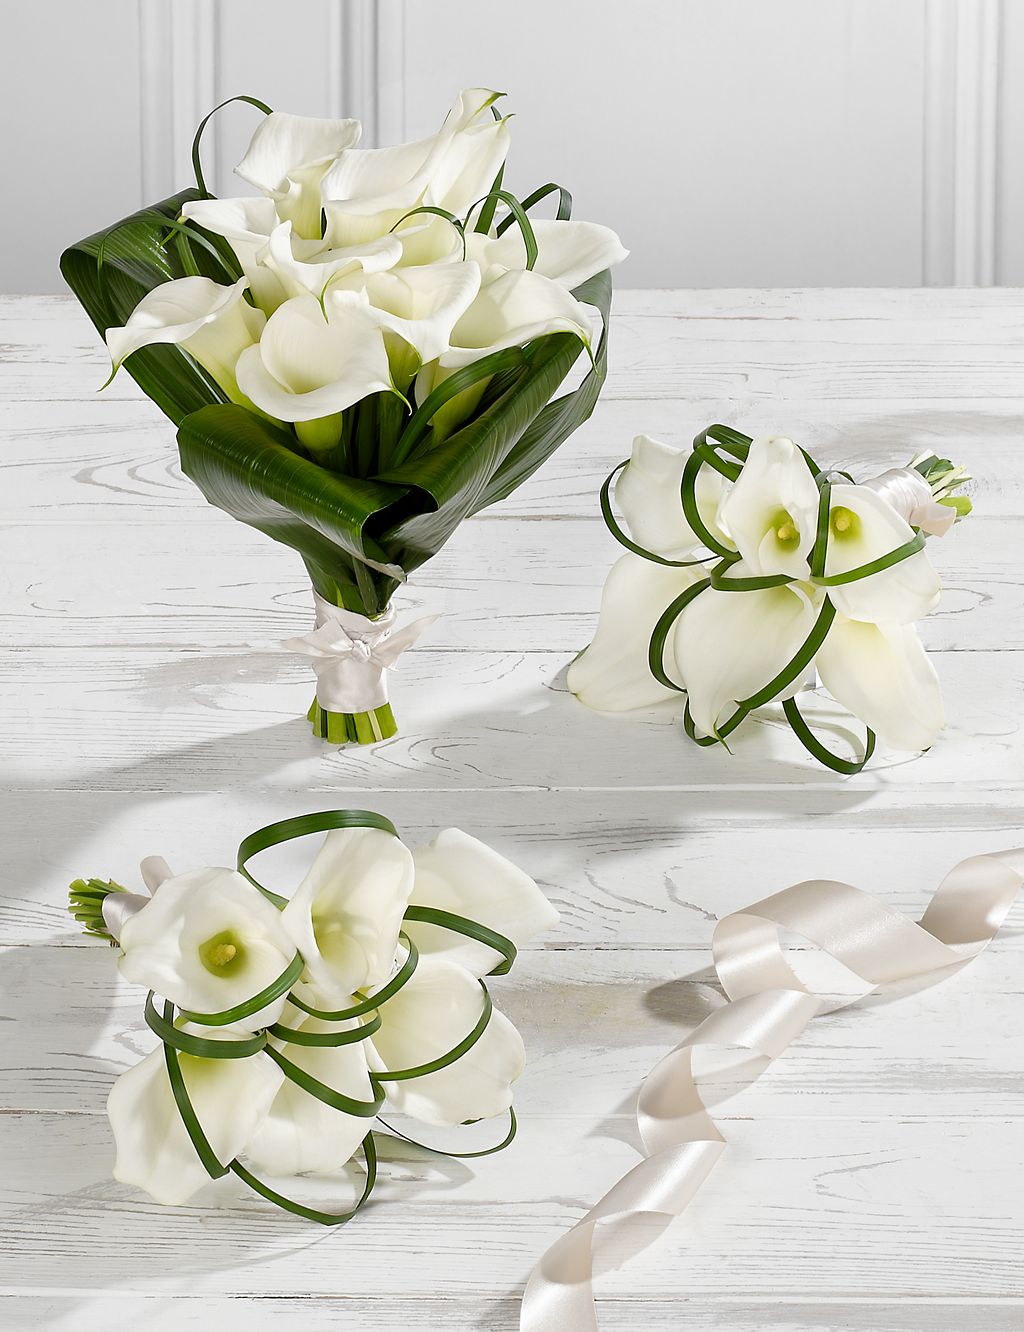 White Calla Lily Wedding Flowers - Collection 1 1 of 1